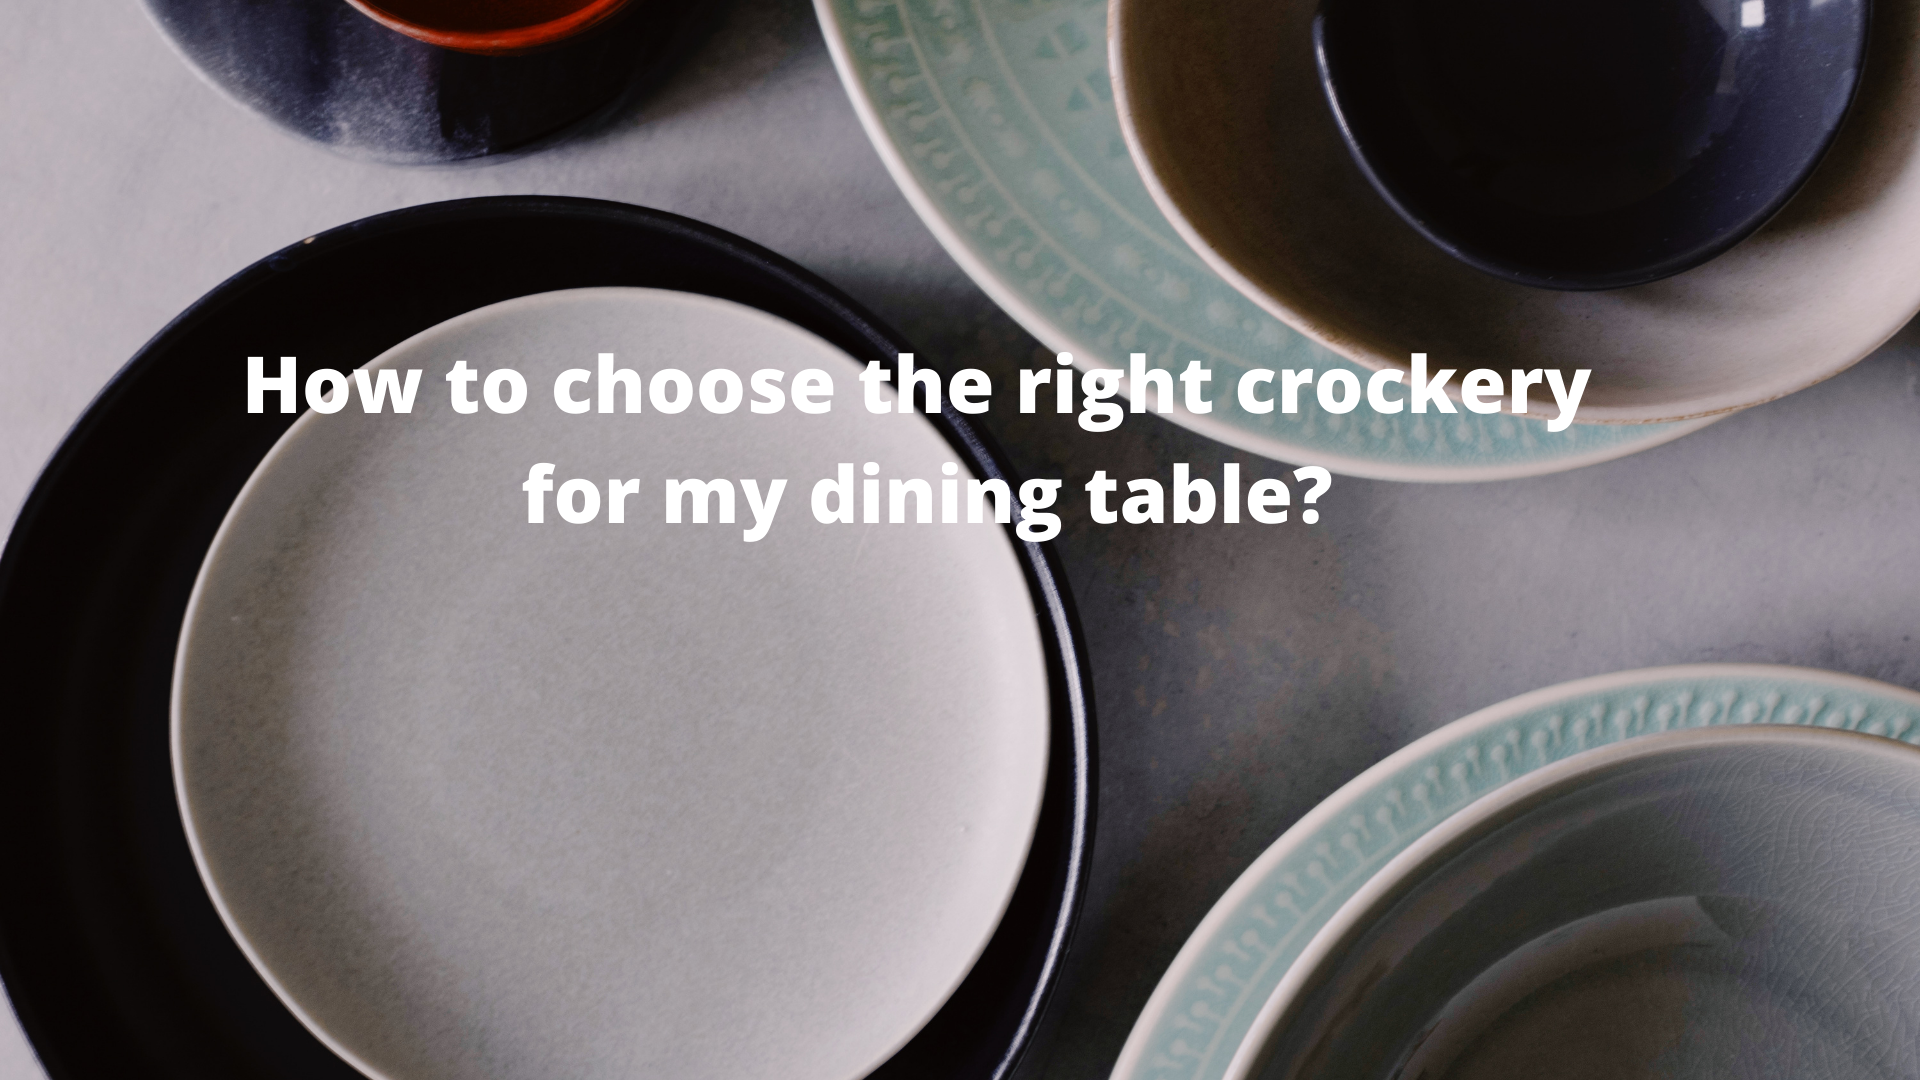 How to choose the right crockery for my dining table?